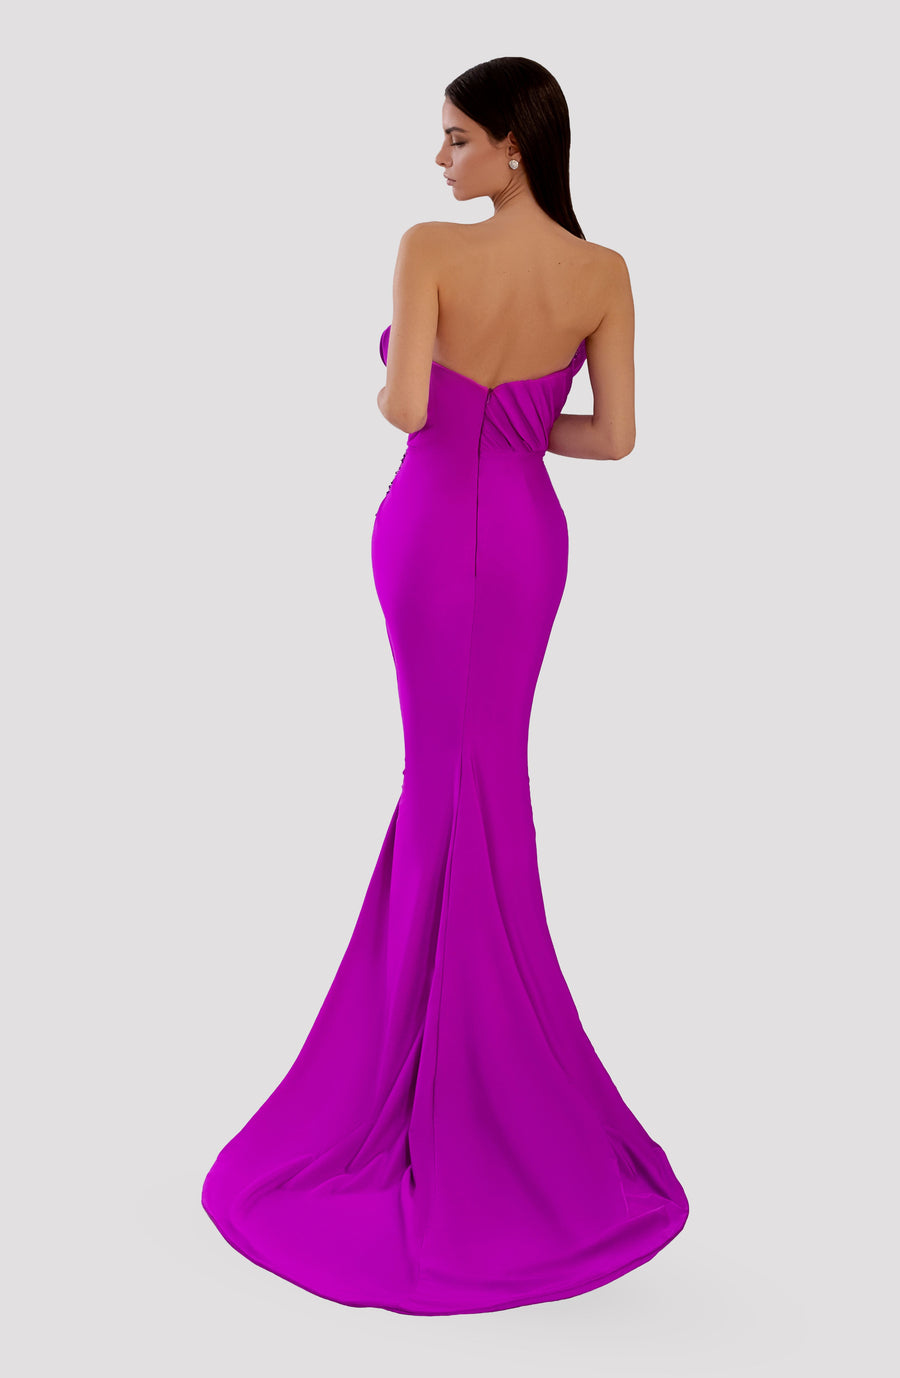 DRAPED VIOLET BEADED BUST GOWN